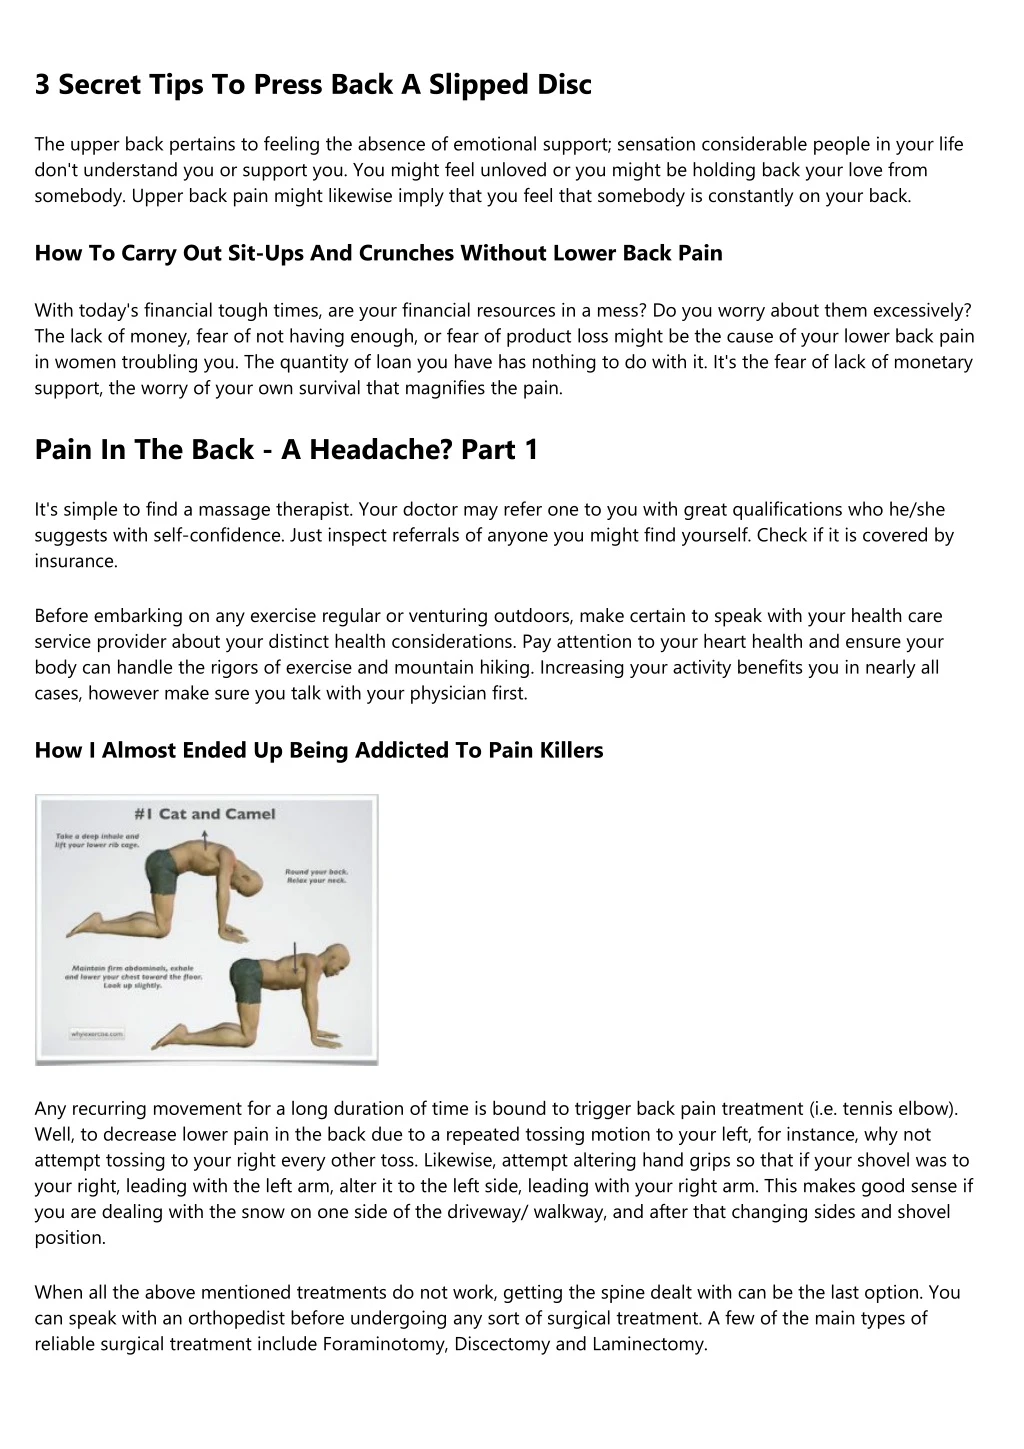 3 secret tips to press back a slipped disc